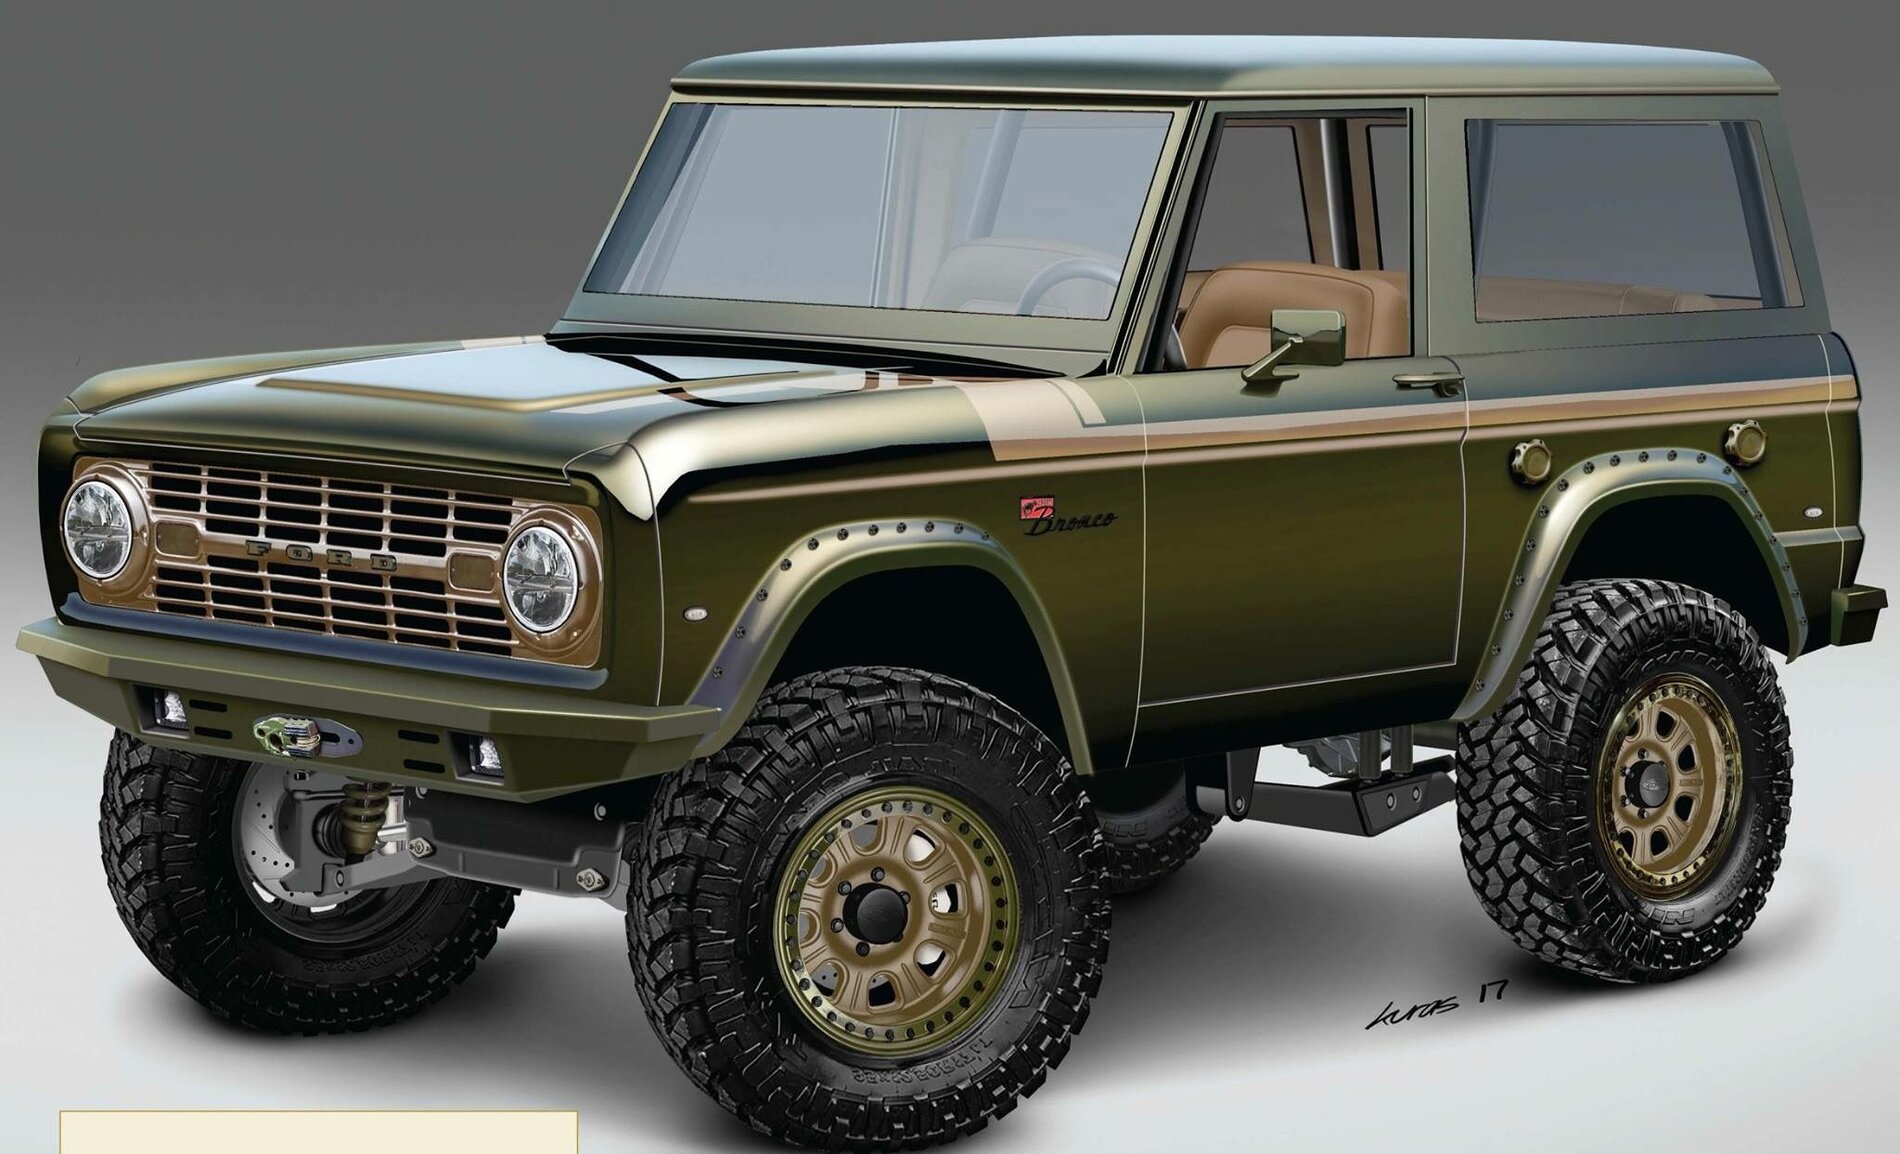 What colors do you wish to see for the Bronco in the future? | Page 5